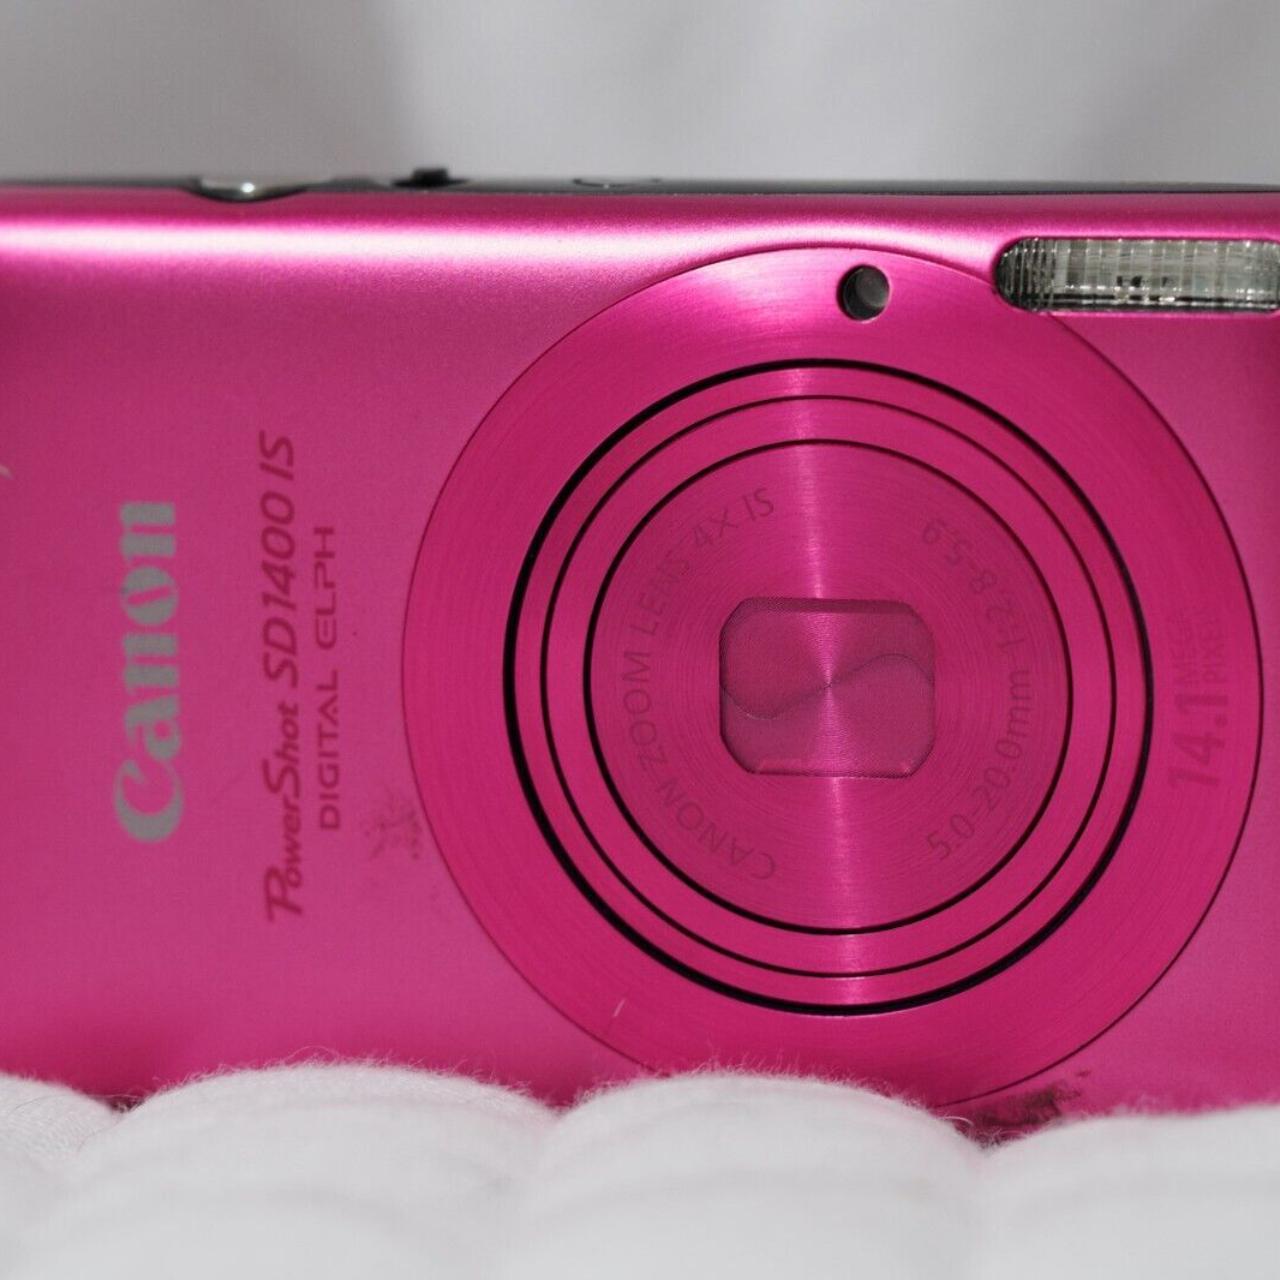 Canon PowerShot SD1400 IS 14.1 MP Camera Pink +... - Depop